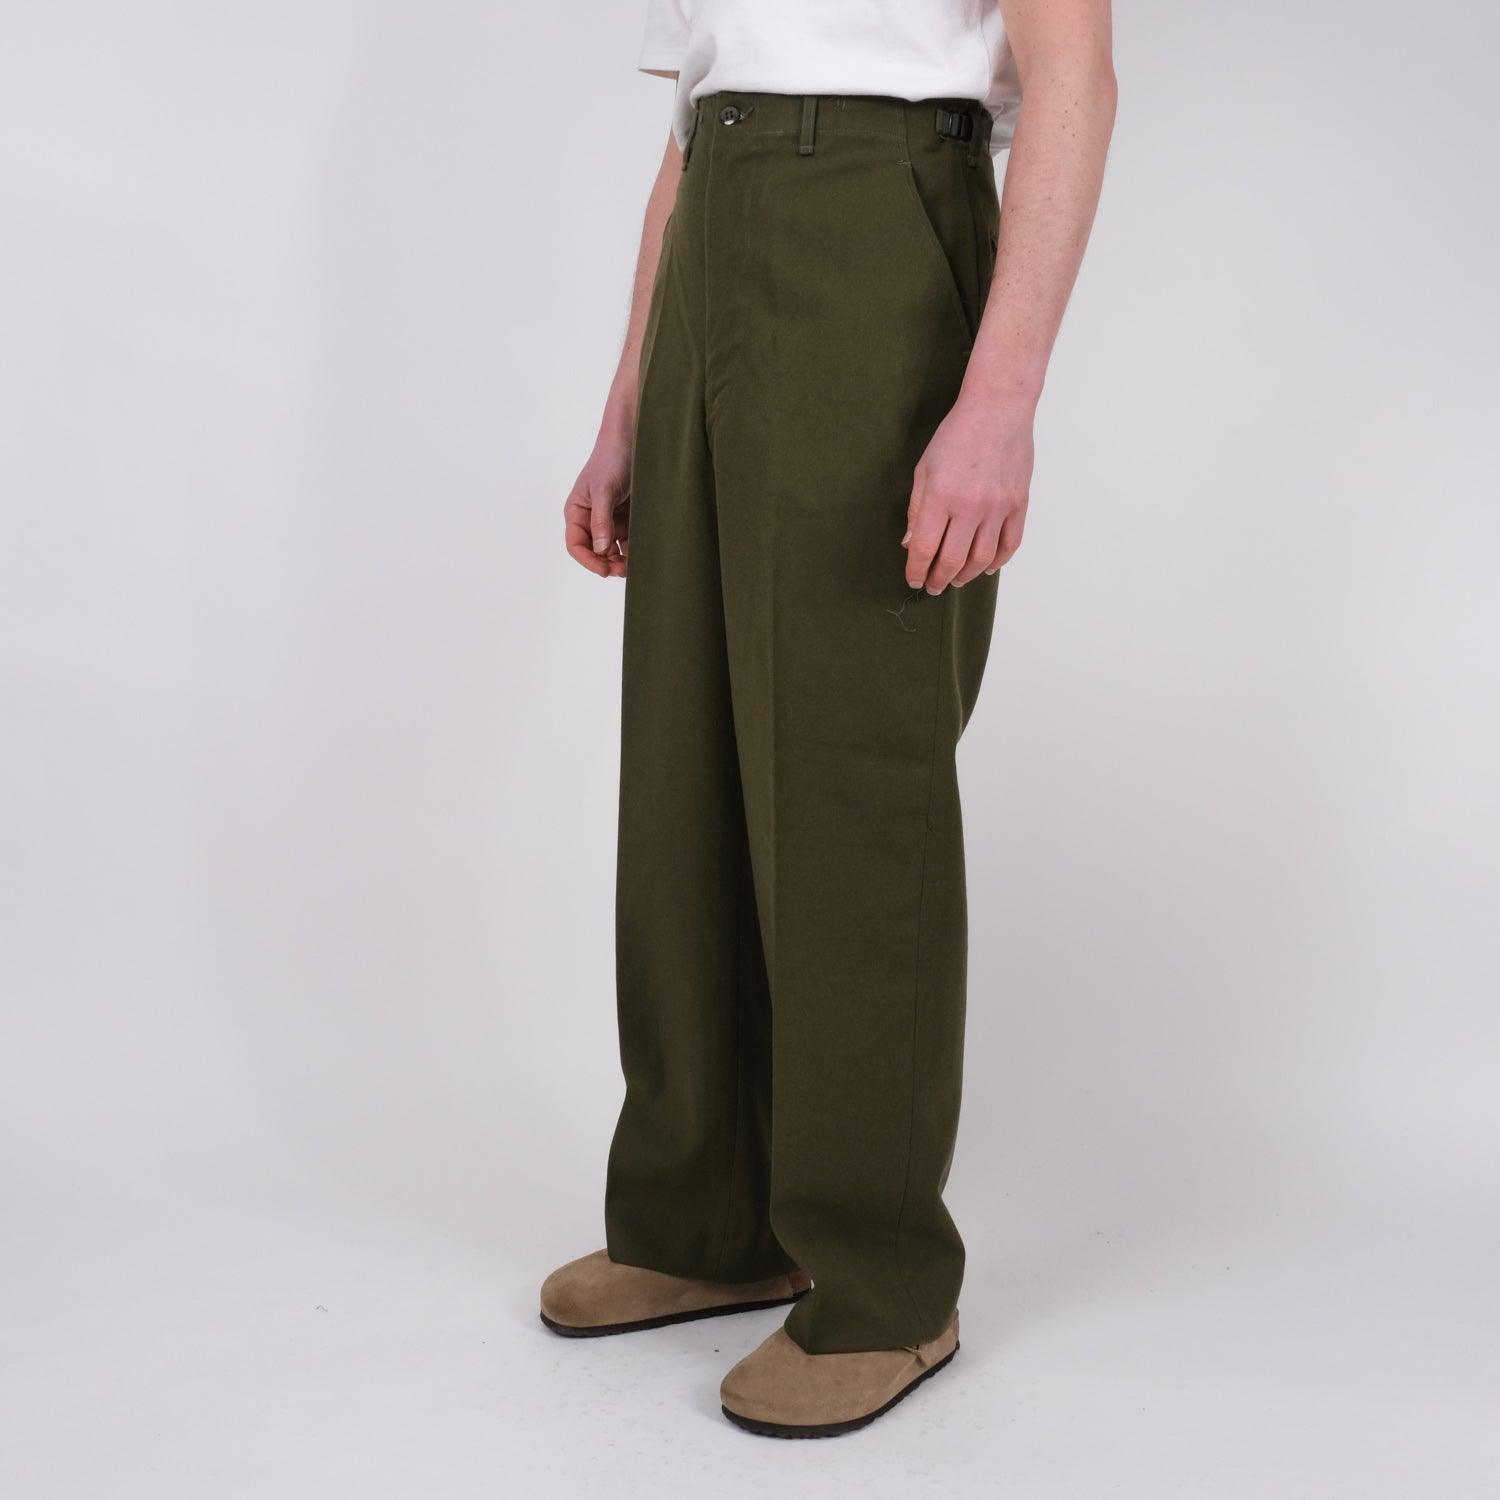 AUSTRALIAN Military Men's Wool Trousers - Browse our Wide Range of  Heavy-Duty Military Surplus Pants for Sale - MILITARY SURPLUS USED CORE  WAREHOUSE